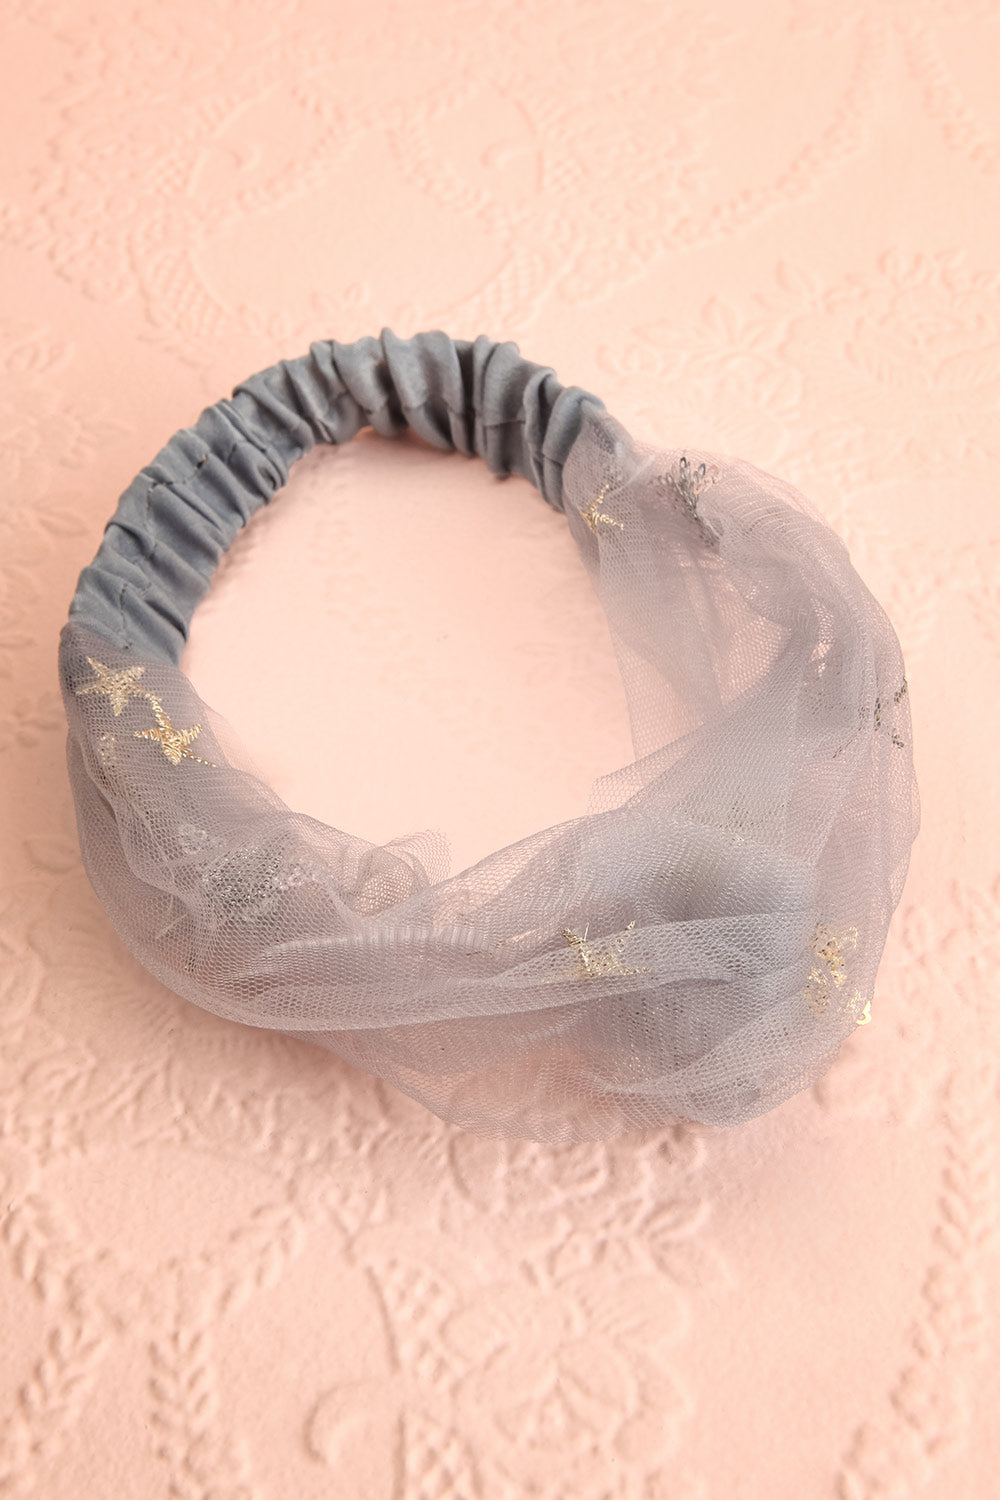 Alausa Grey Tulle Headband with Sequin Stars | Boutique 1861 7